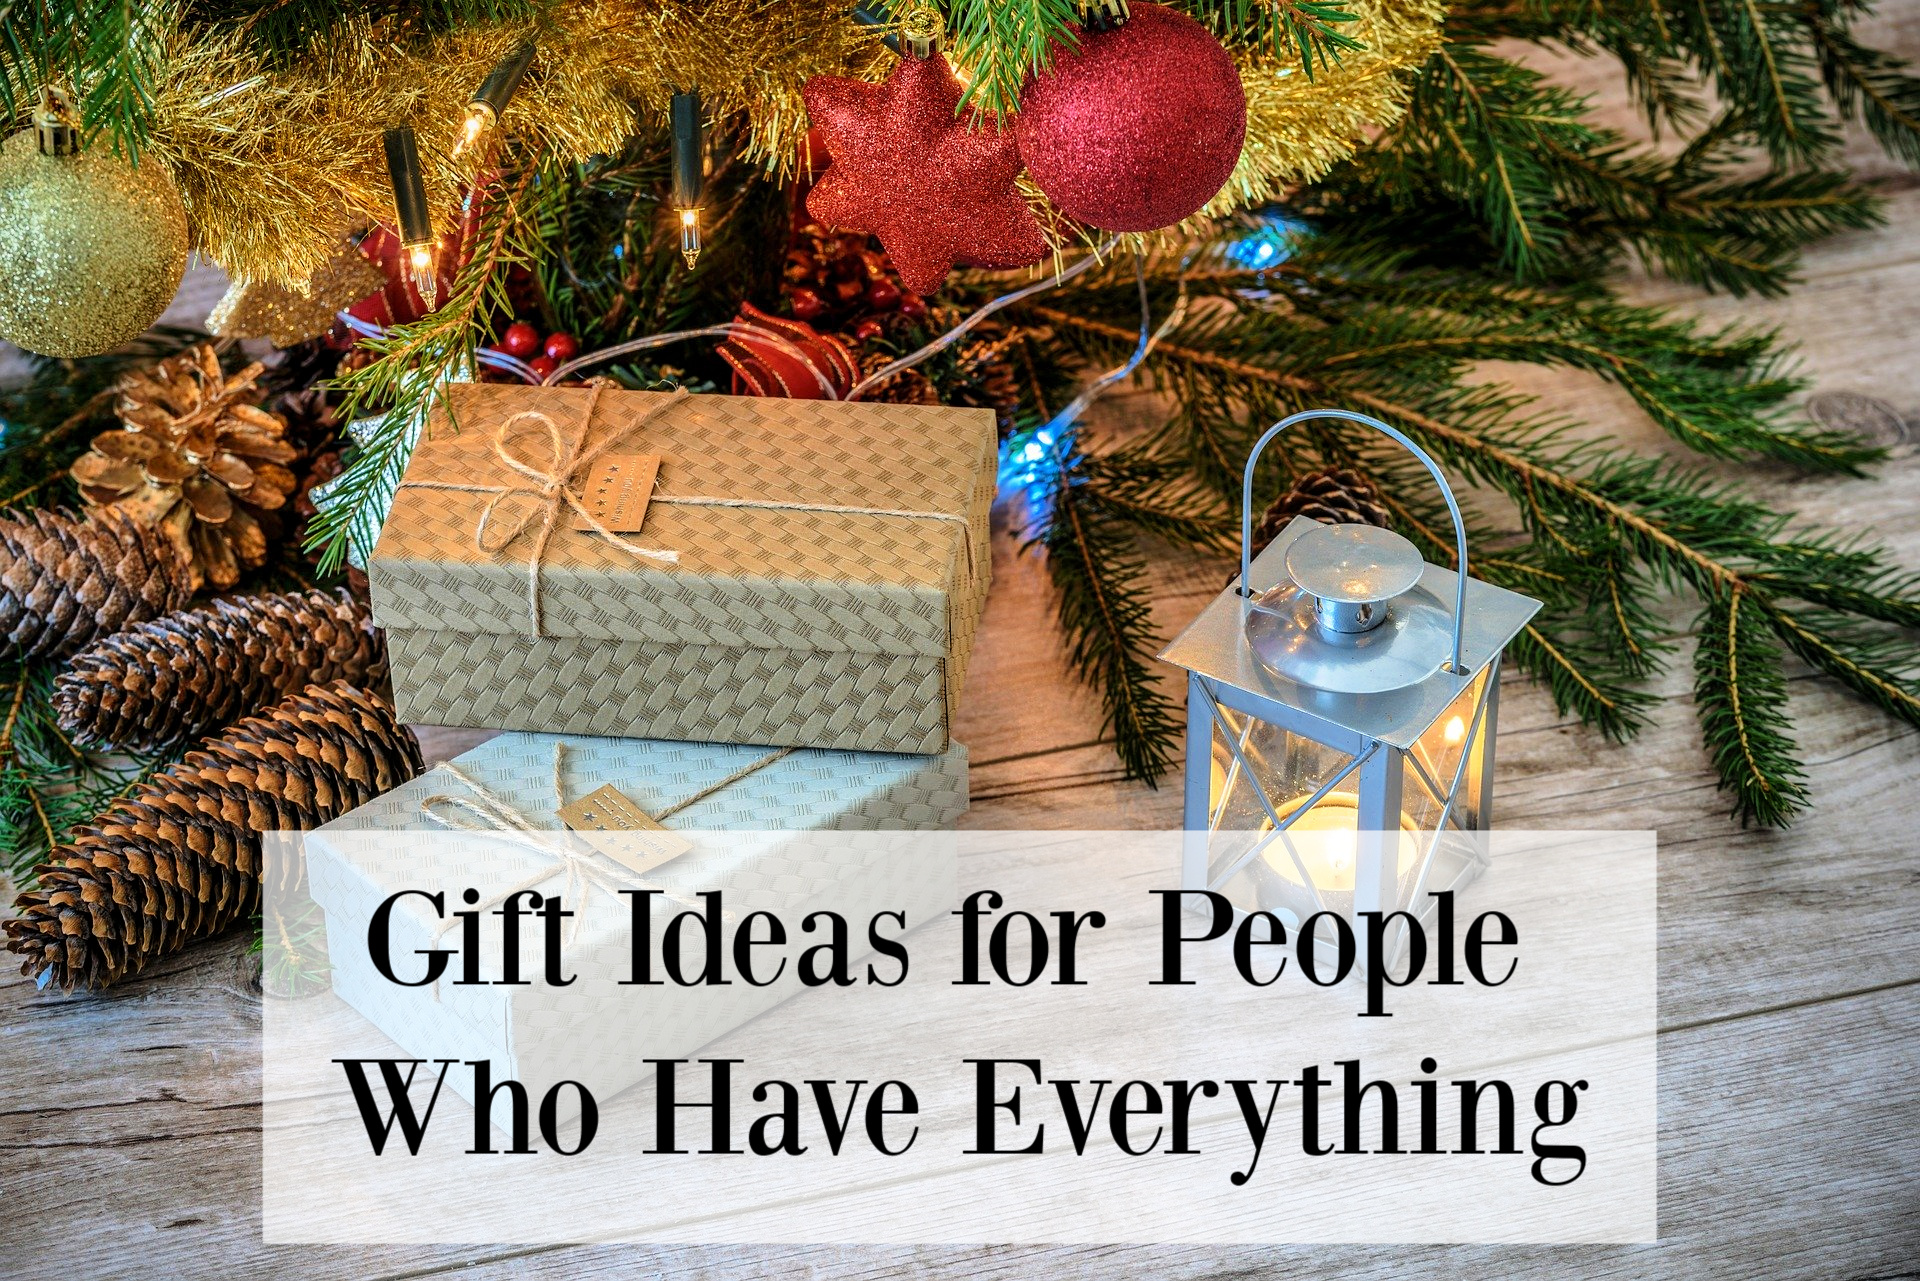 Gift Ideas for People Who Have Everything - The Green Eyed Lady Blog